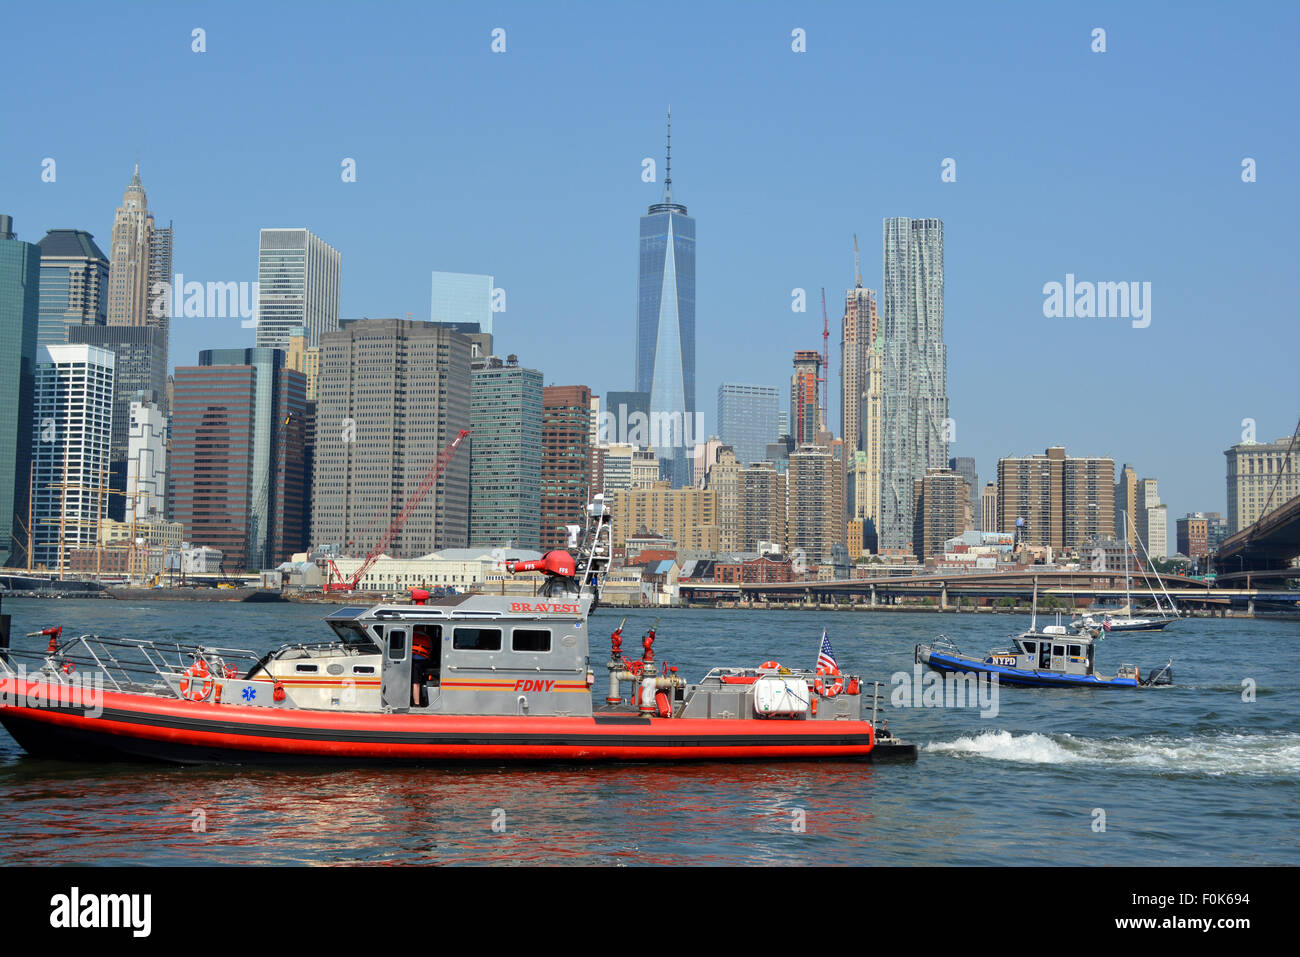 FDNY and NYPD boats responding to an emergency on the East River in New York City. Stock Photo